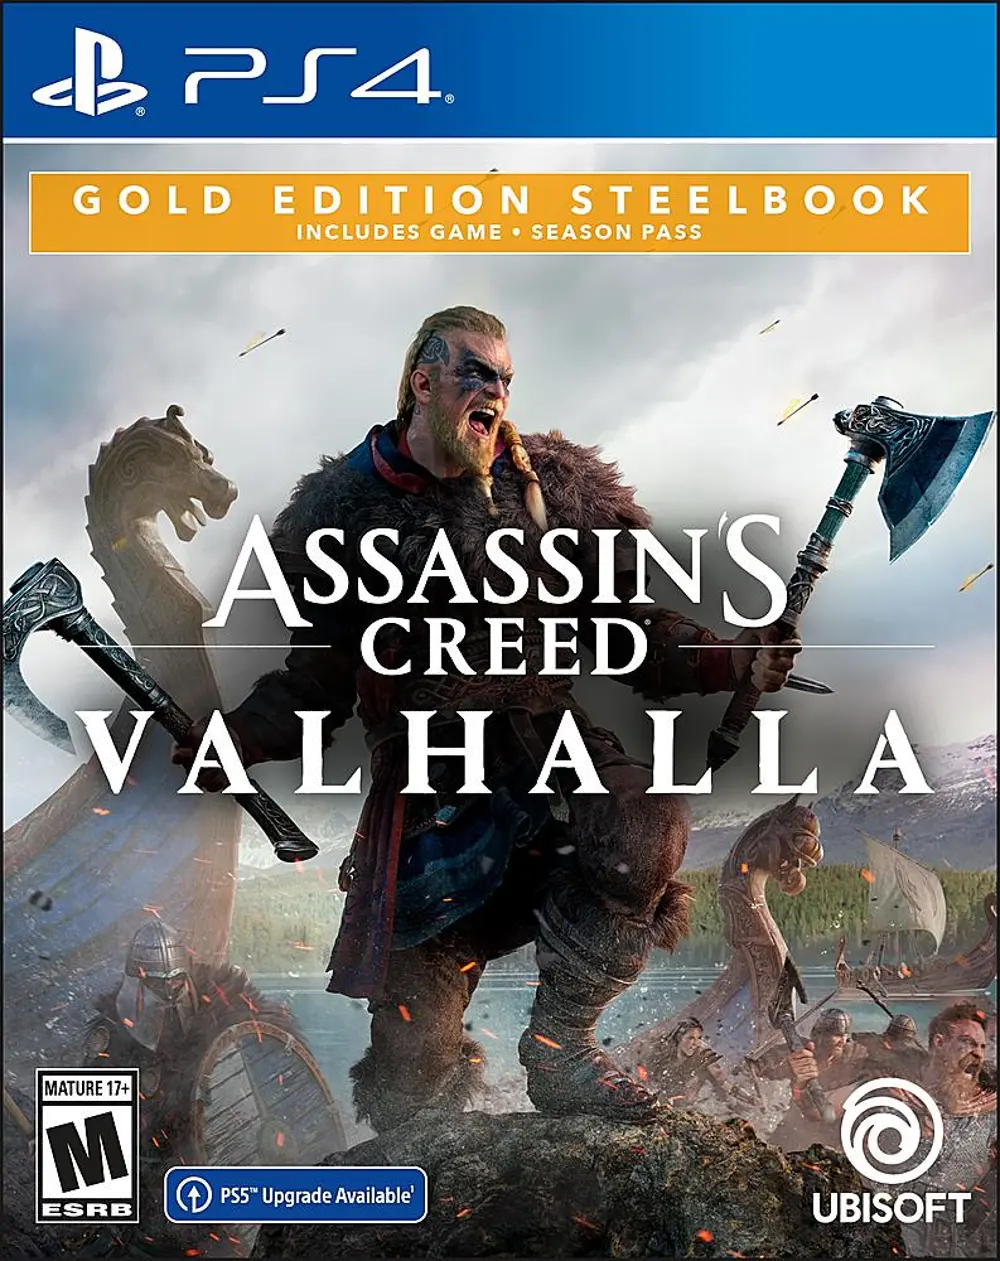 PS4 UBI 11062 Assassin's Creed Valhalla Gold Steelbook Edition - PS4-1